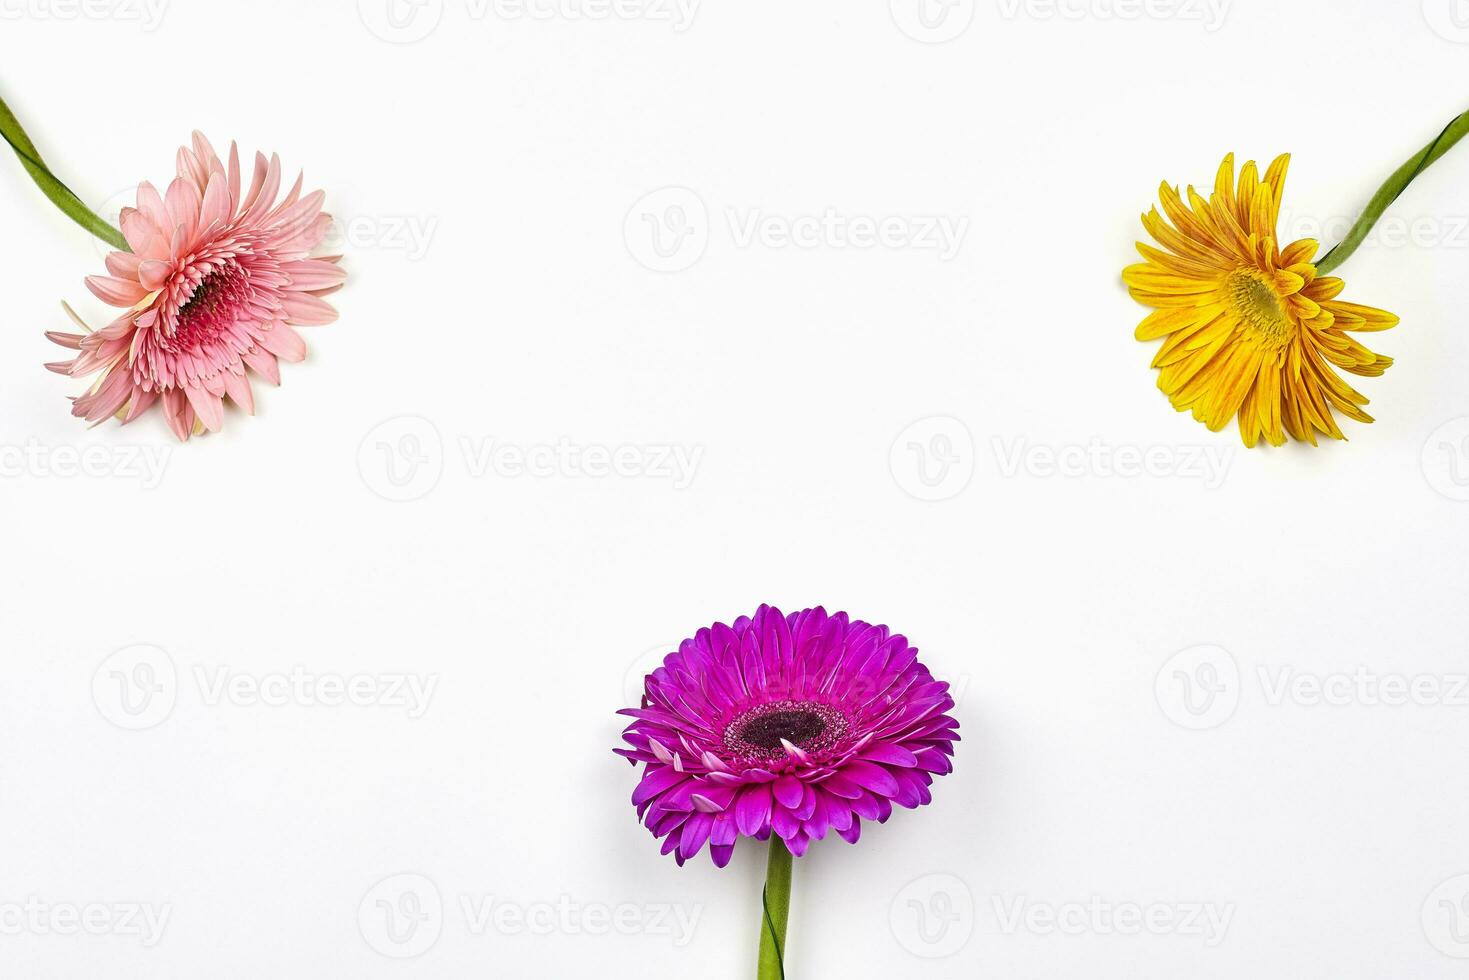 Colorful and fresh spring flowers photo